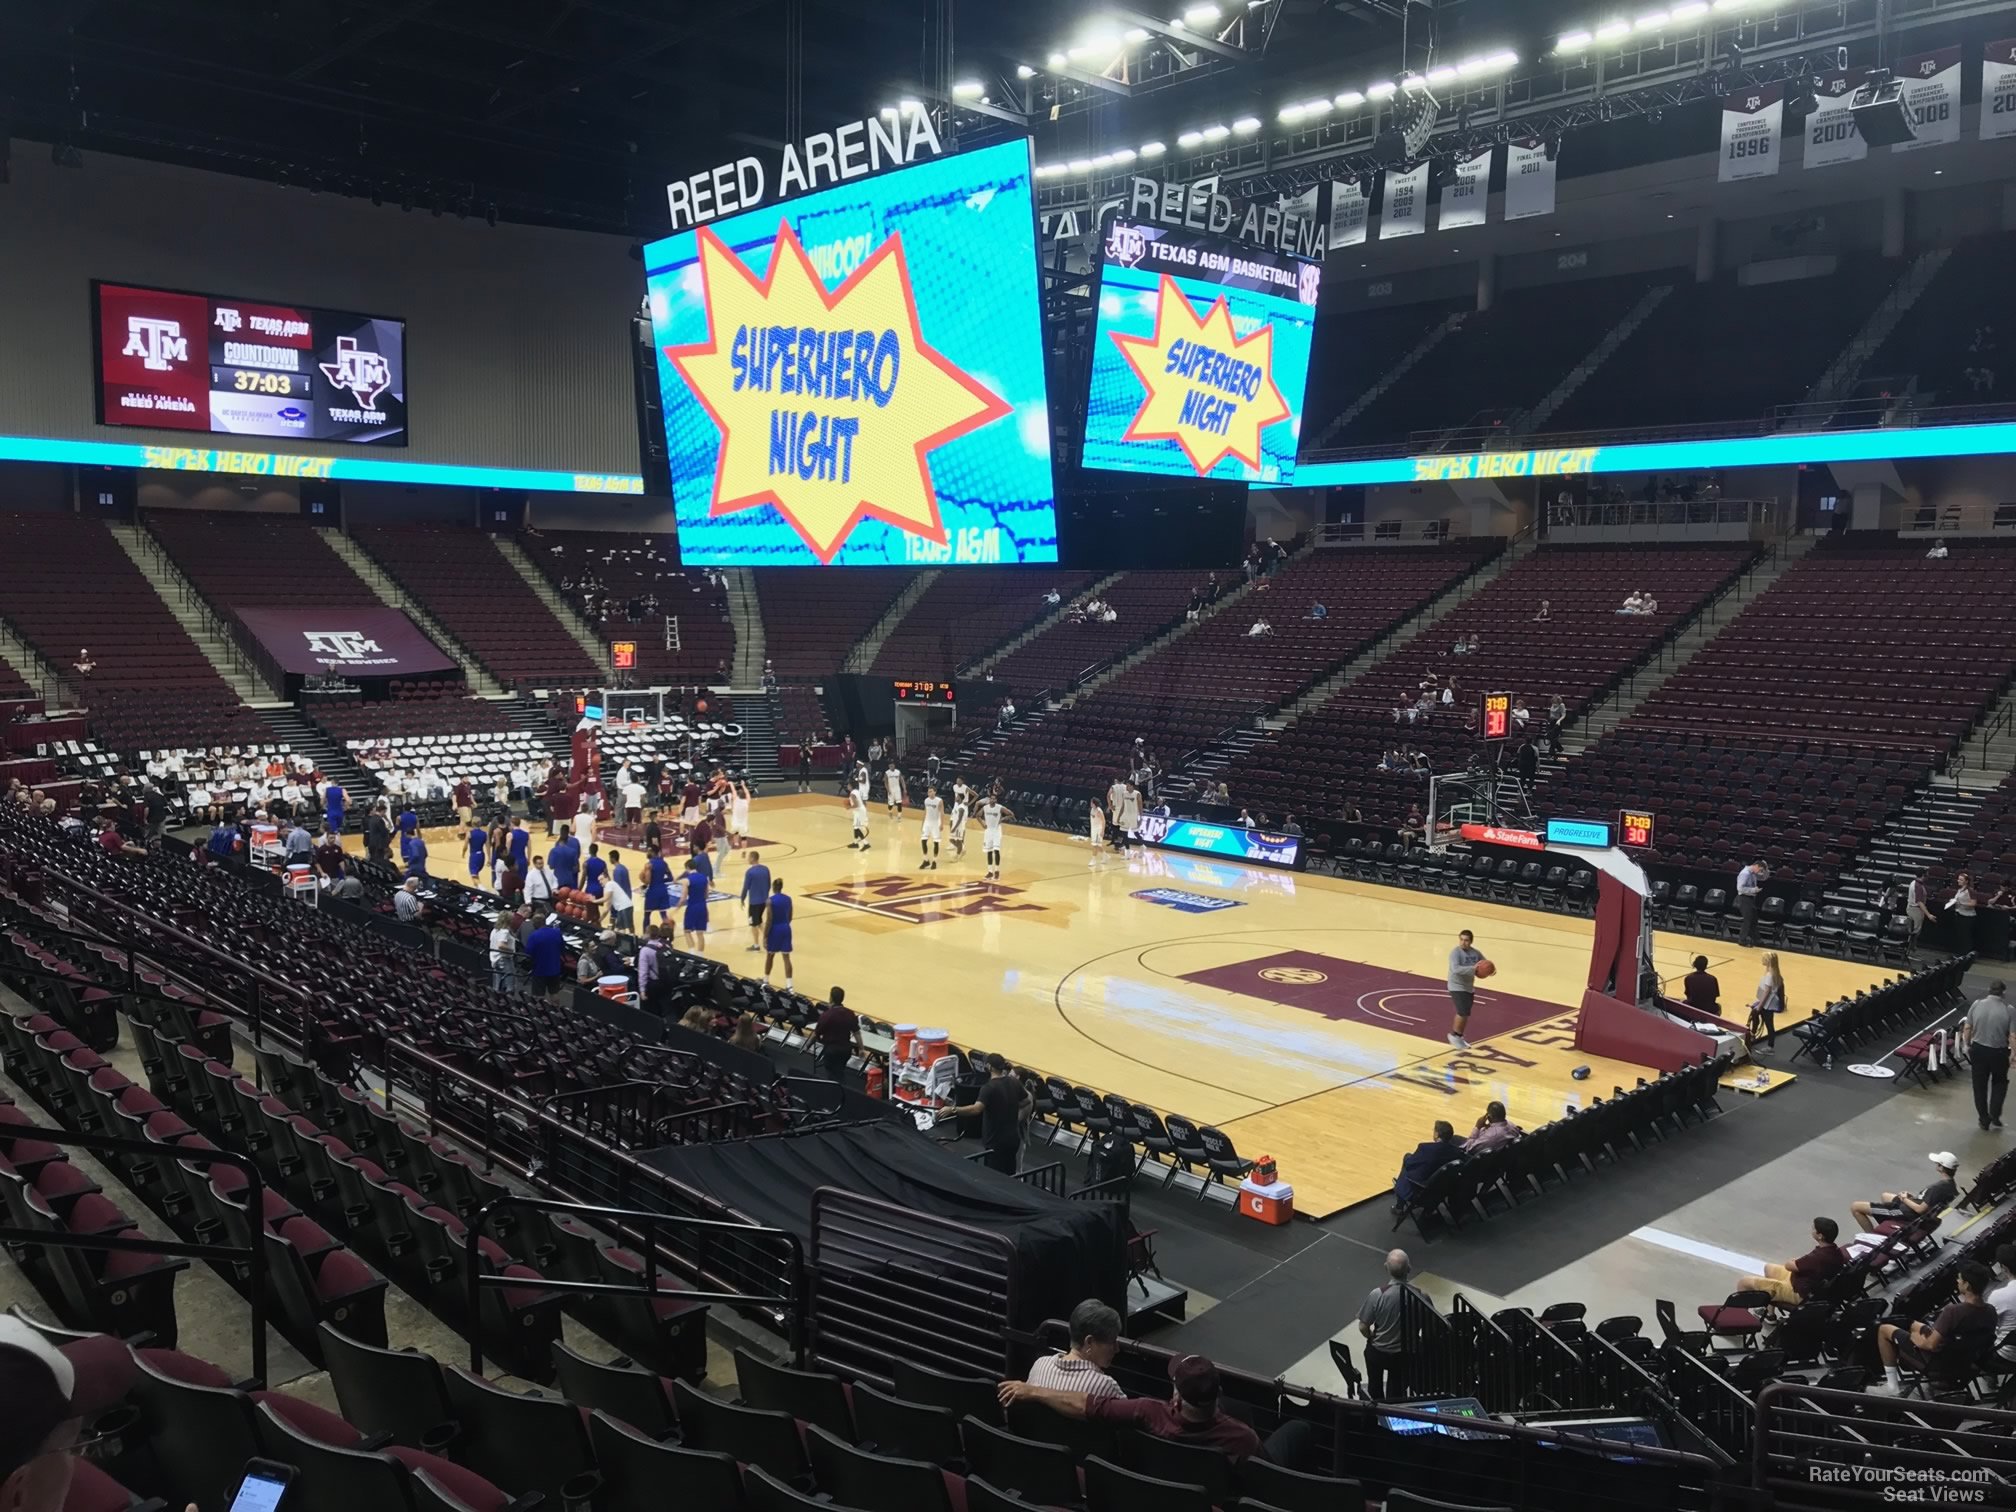 section 118, row j seat view  - reed arena